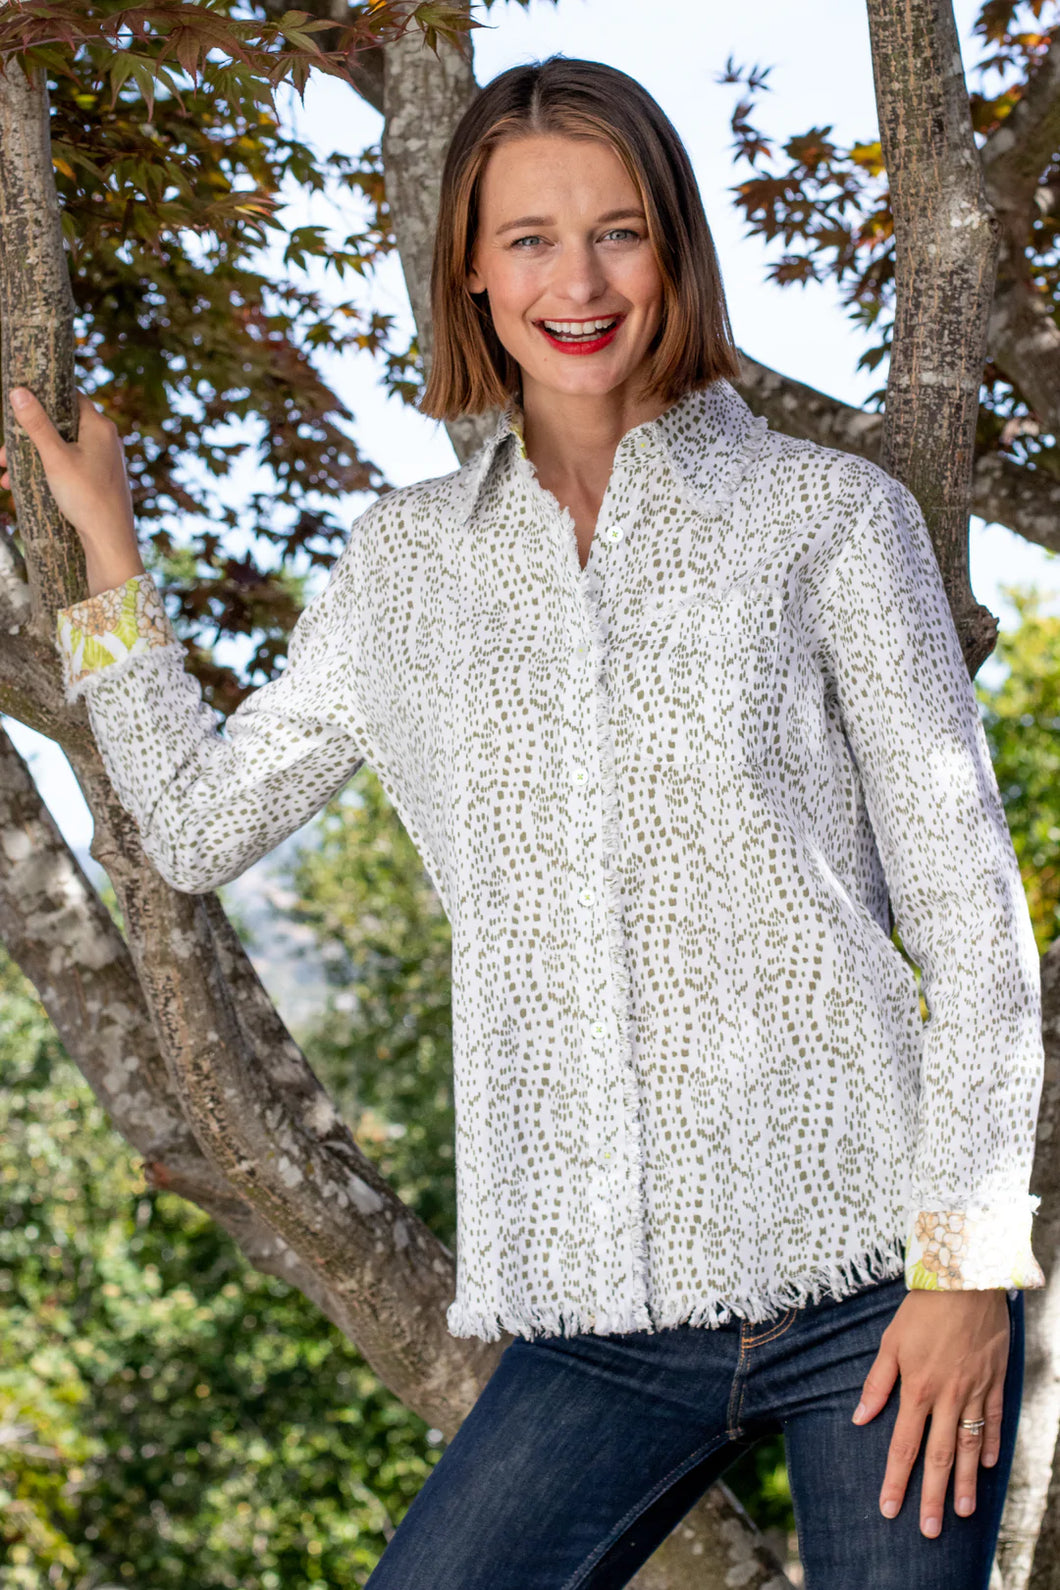 Cape Cod Tunic, Green Dots on White by Dizzy Lizzie